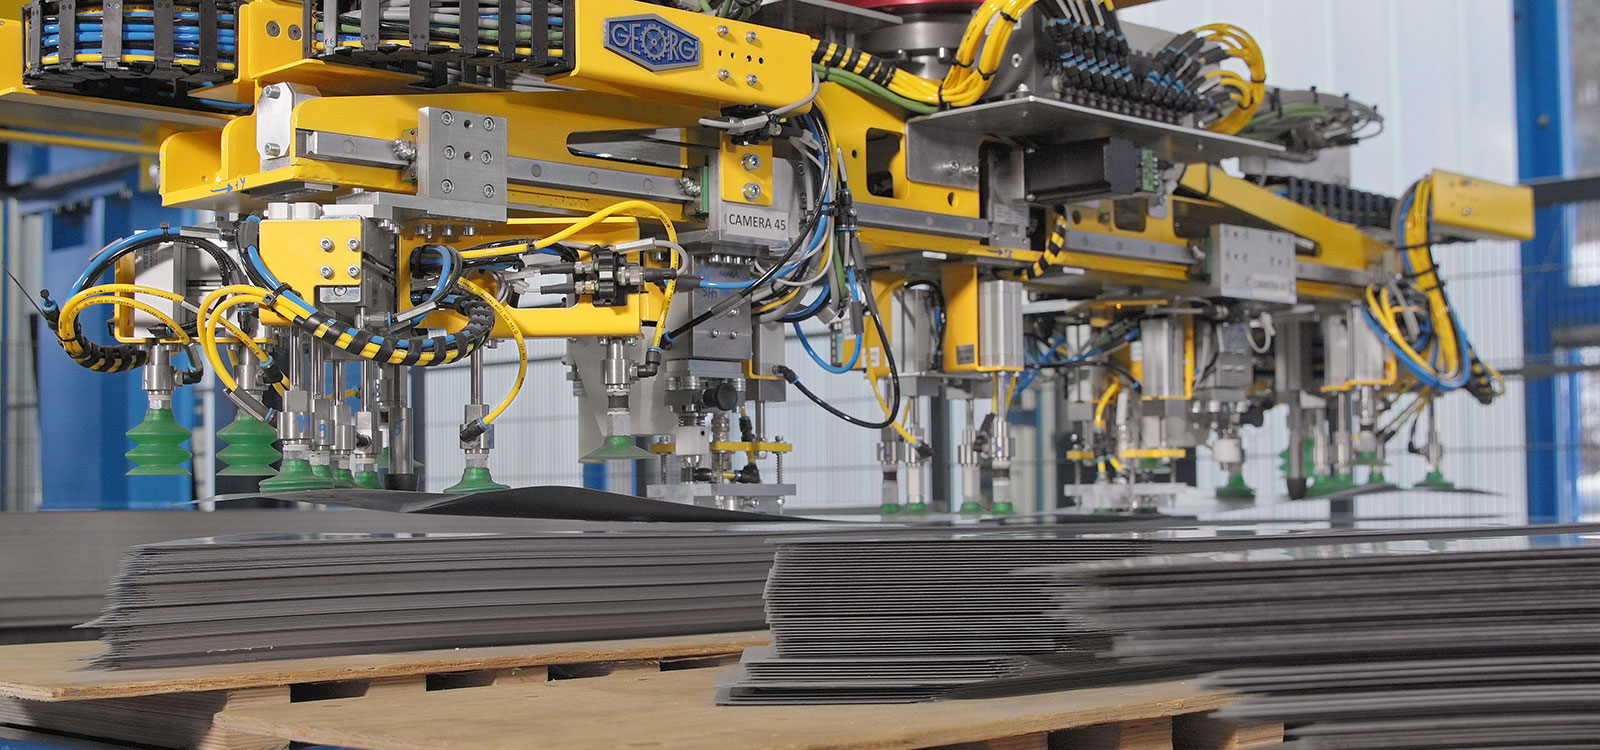 GEORG | Core stacking tables and automized core stacking systems